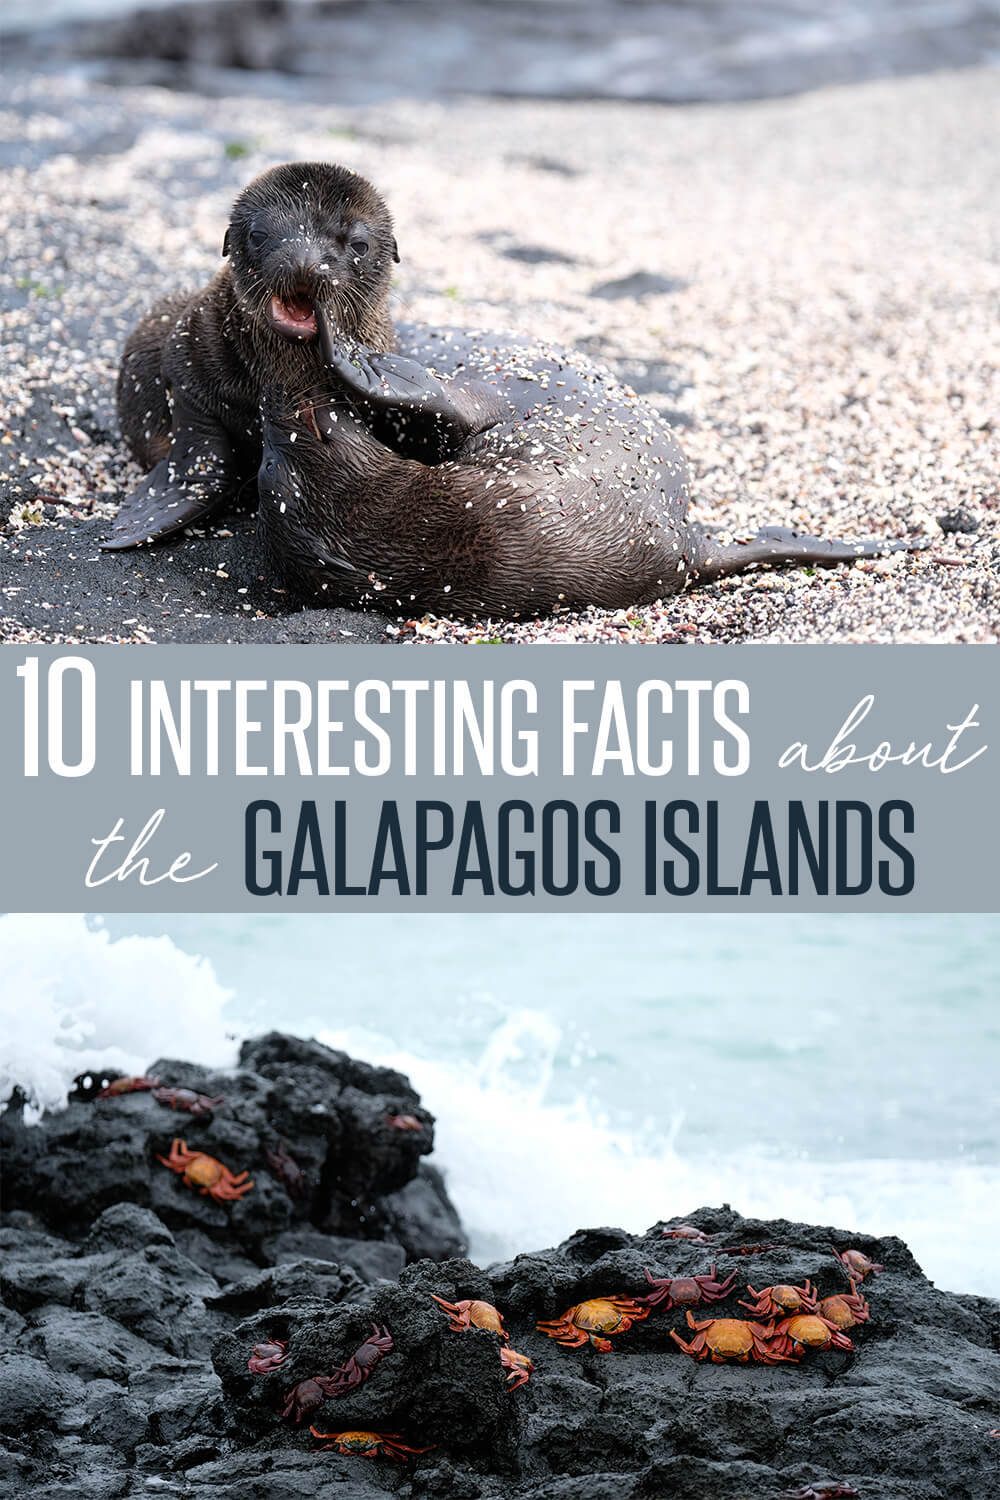 10 Interesting Facts About the Galapagos Islands